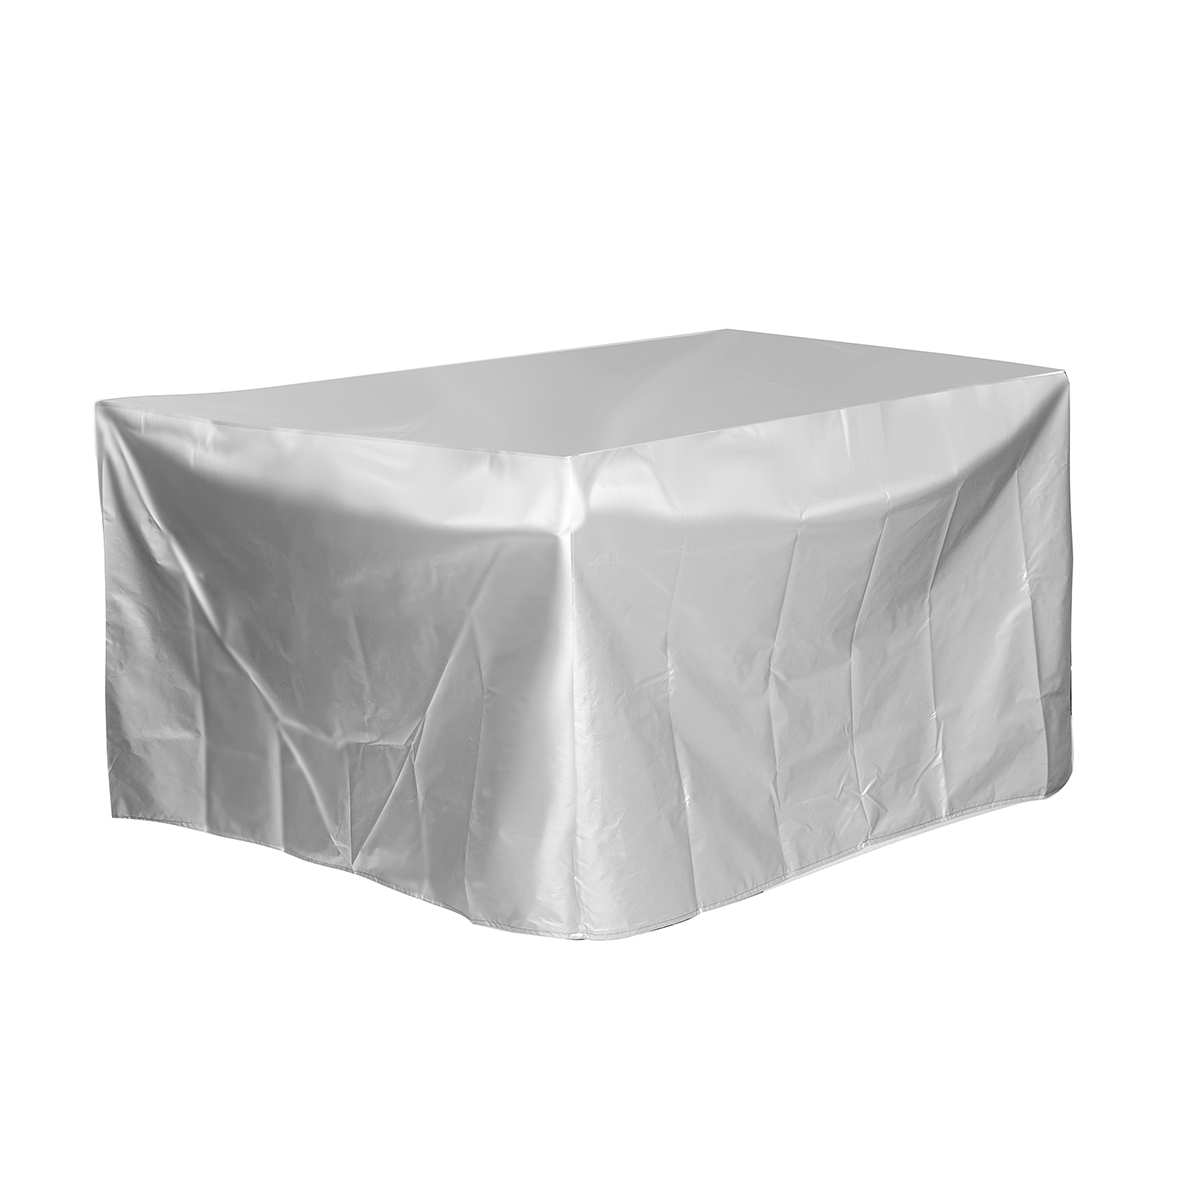 Find Patio Garden Waterproof Furniture Cover Set UV Rain Shelter Protector for Sale on Gipsybee.com with cryptocurrencies